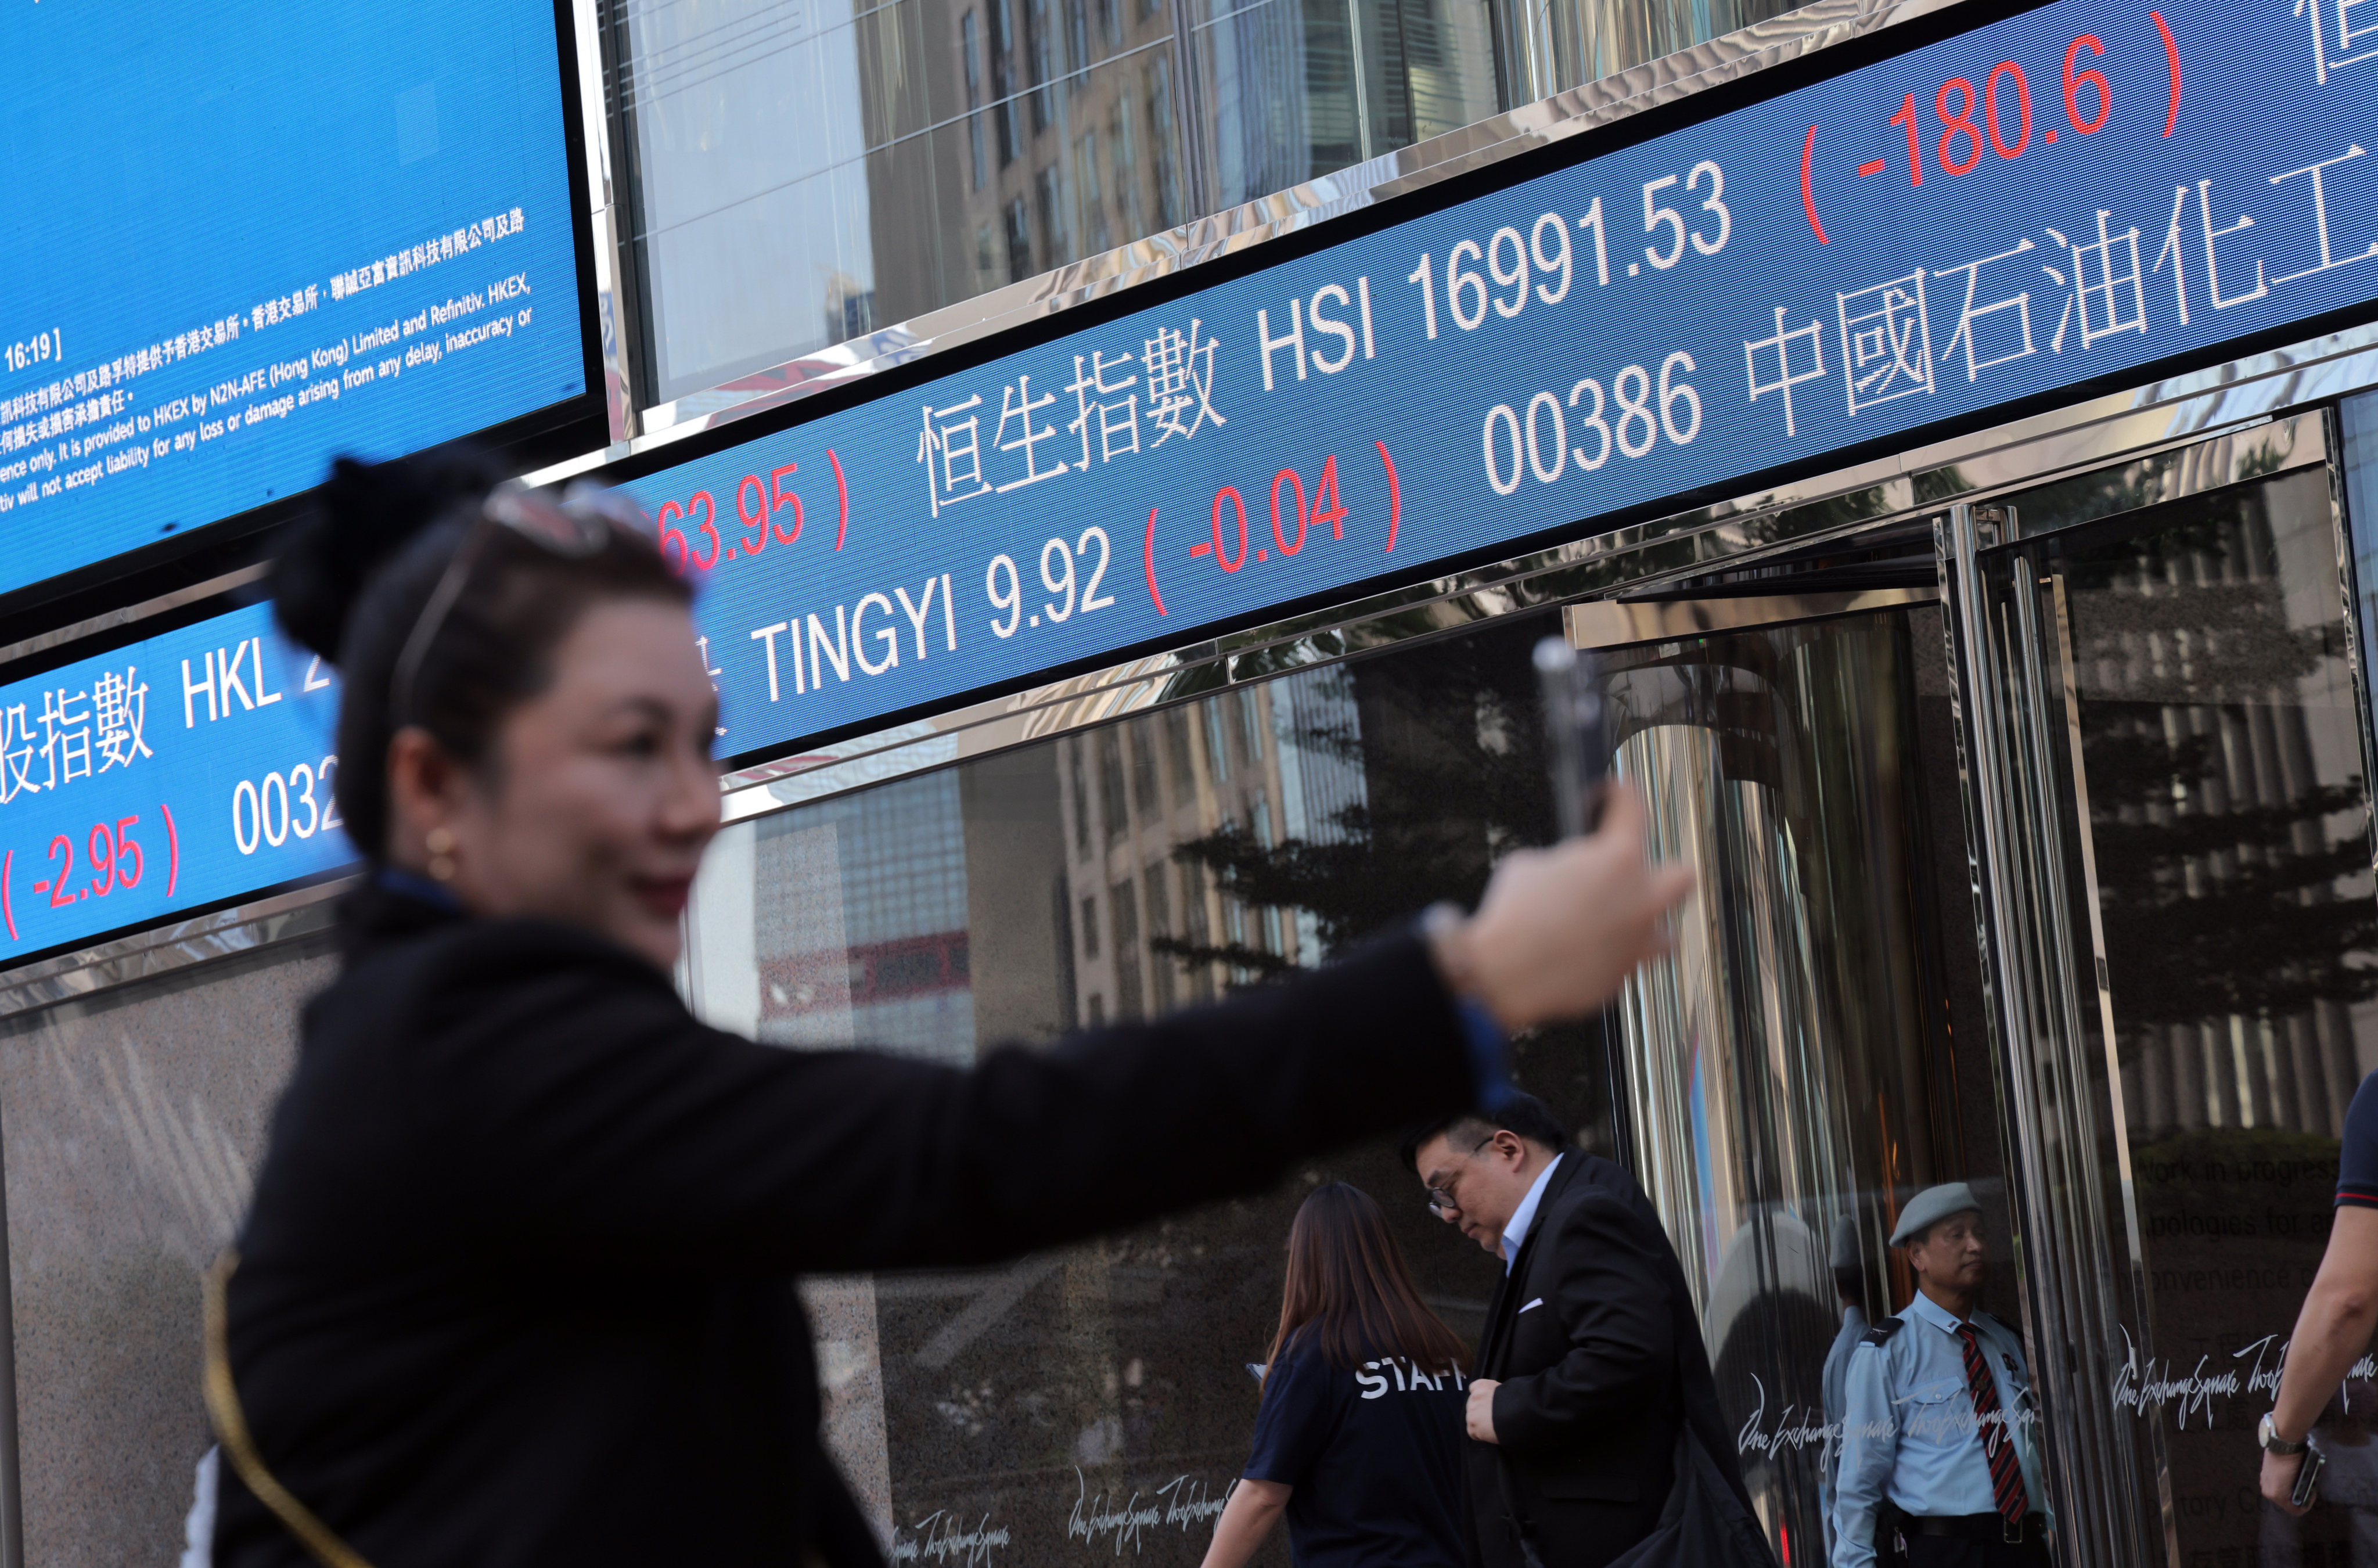 A woman takes a selfie near a screen showing the Hang Seng stock index outside Exchange Square in Central, Hong Kong, on October 24. Photo: Jelly Tse